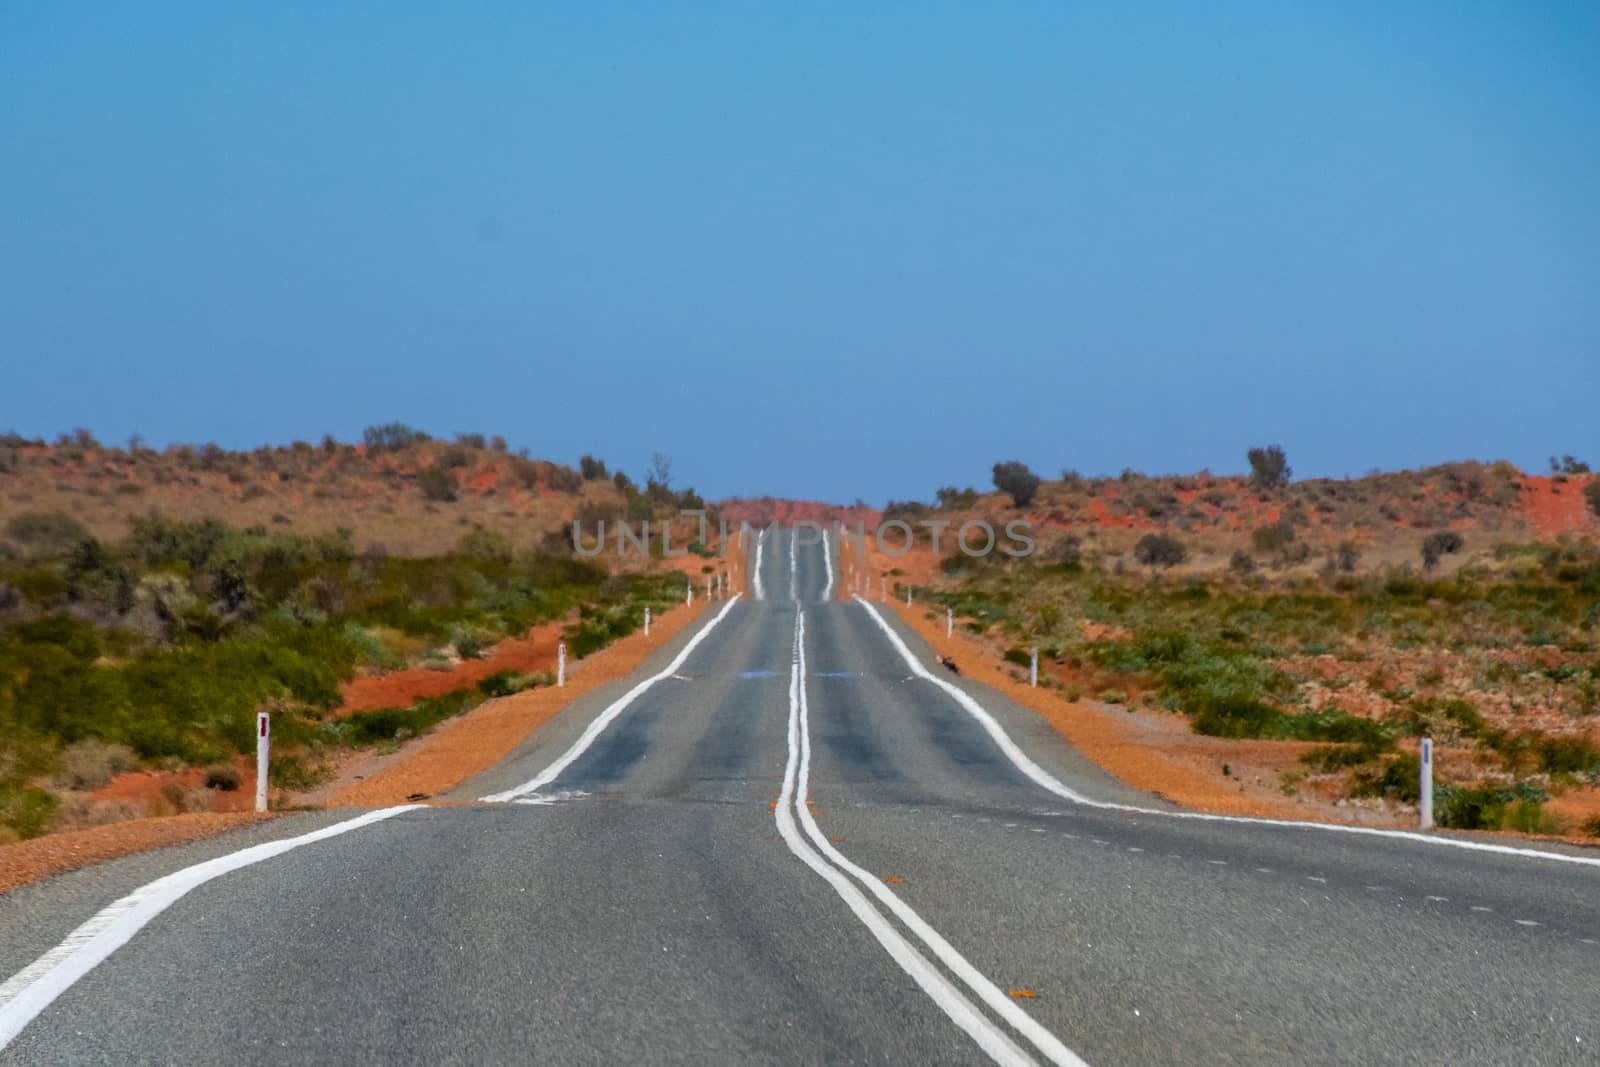 Road straightening up on the way to Coral Bay Australia